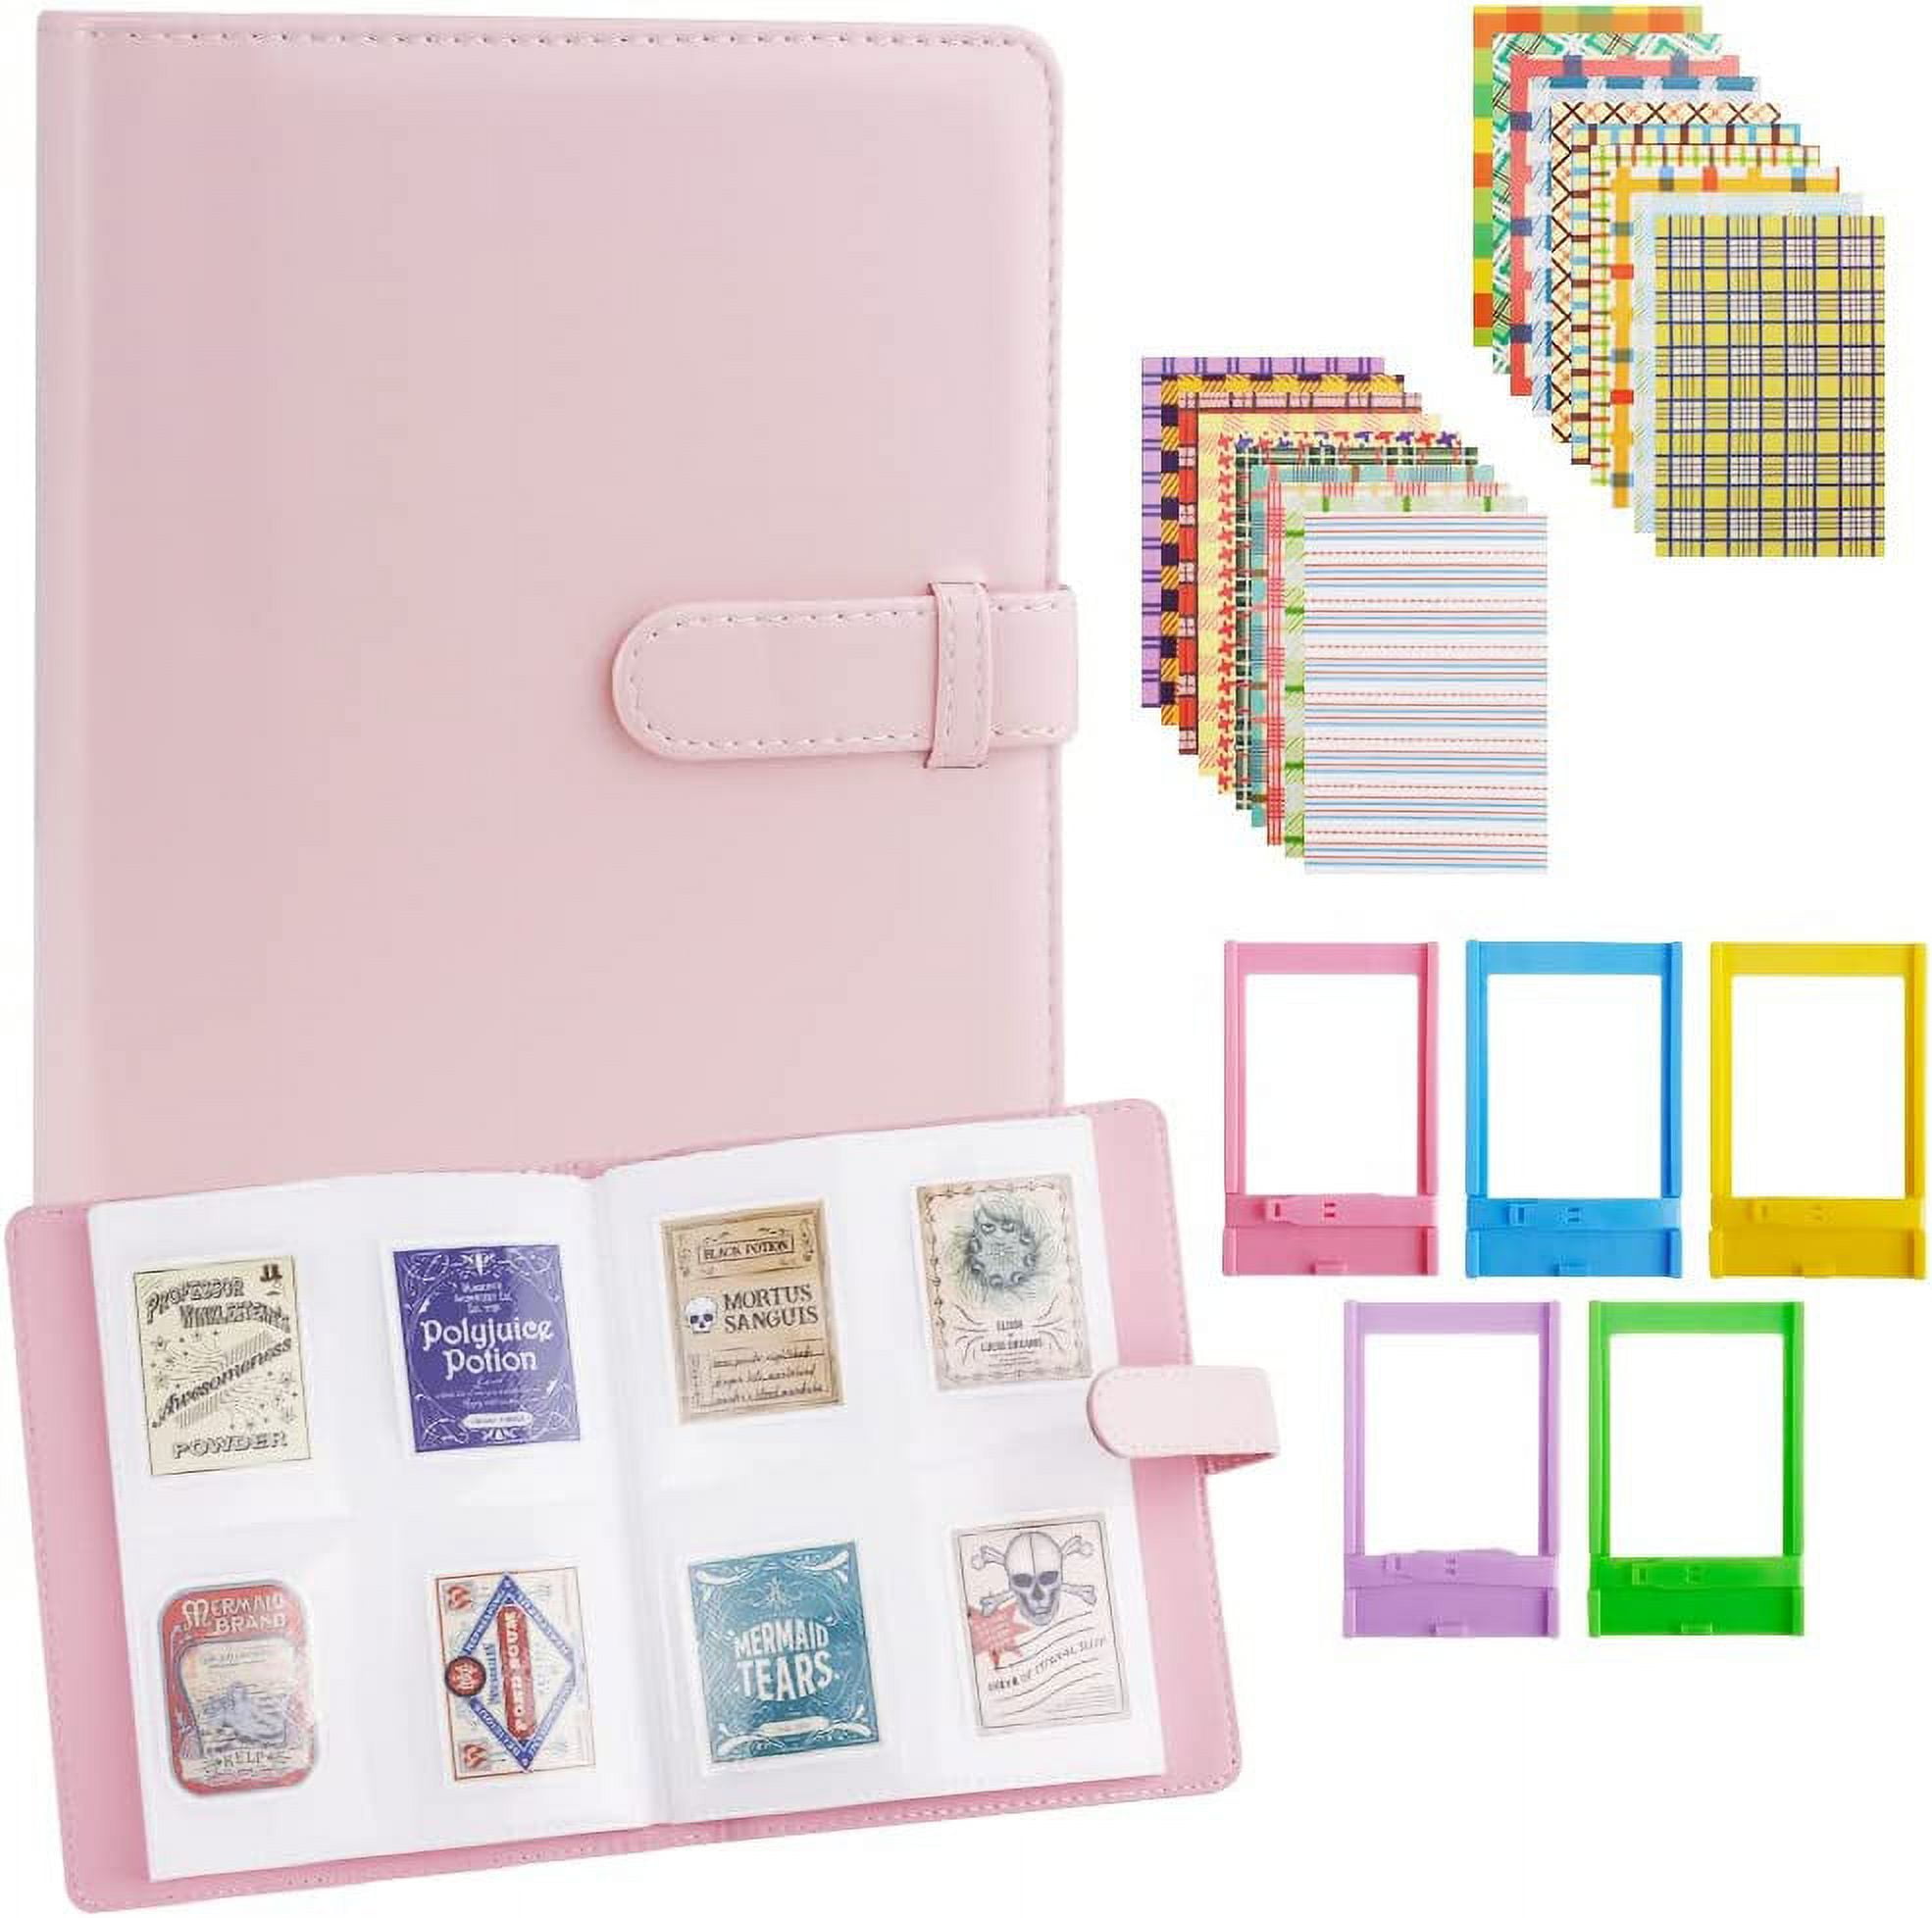 Scrapbooking Photo Album for Kids, Custome Gift for Kids, Photo Album With  Sleeve Pockets and Design Cards, Instax Mini Photos 